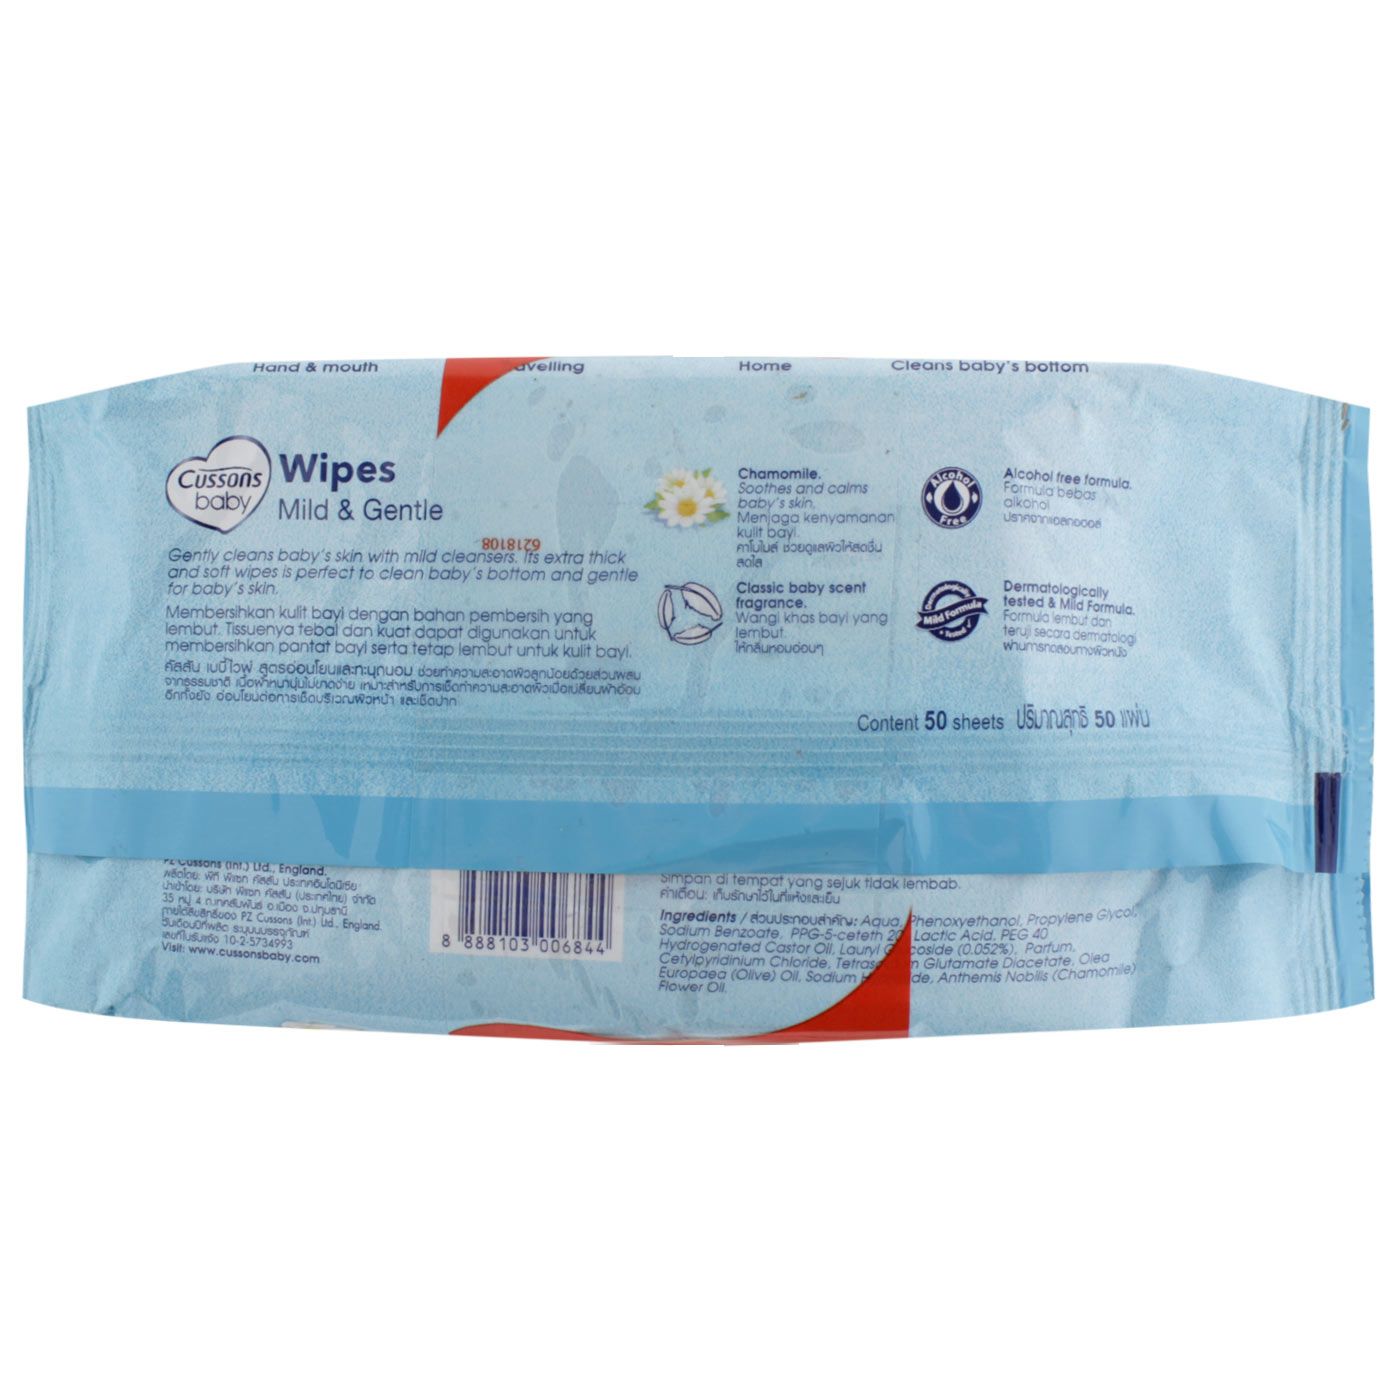 Cussons Baby Thick Wipes Mild & Gentle 50's (Isi 2) - 3